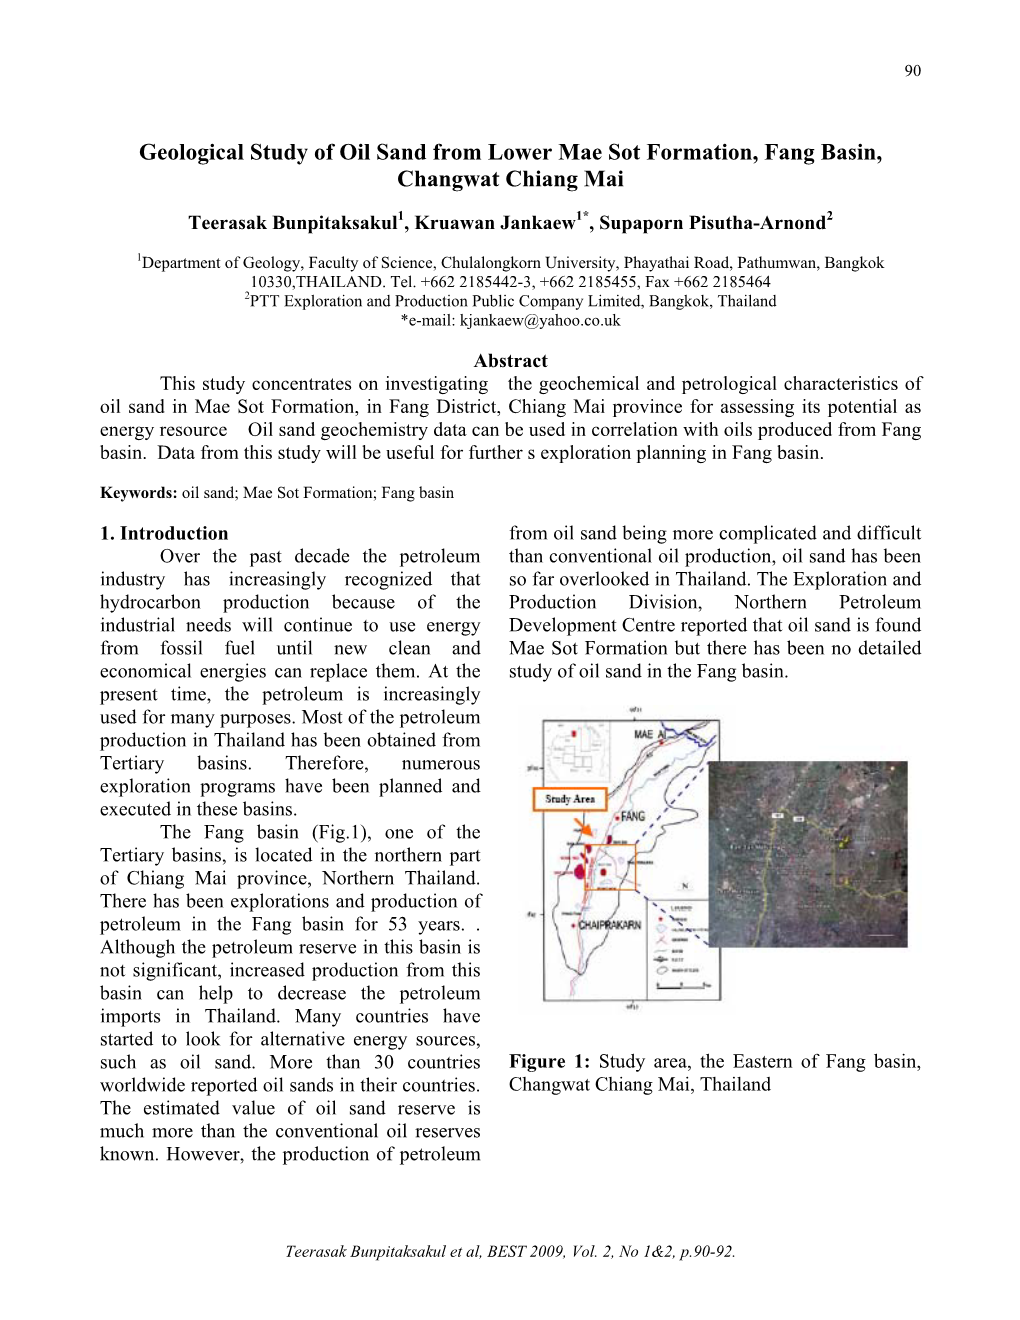 Geological Study of Oil Sand from Lower Mae Sot Formation,Fang Basin, Changwat Chiangmai